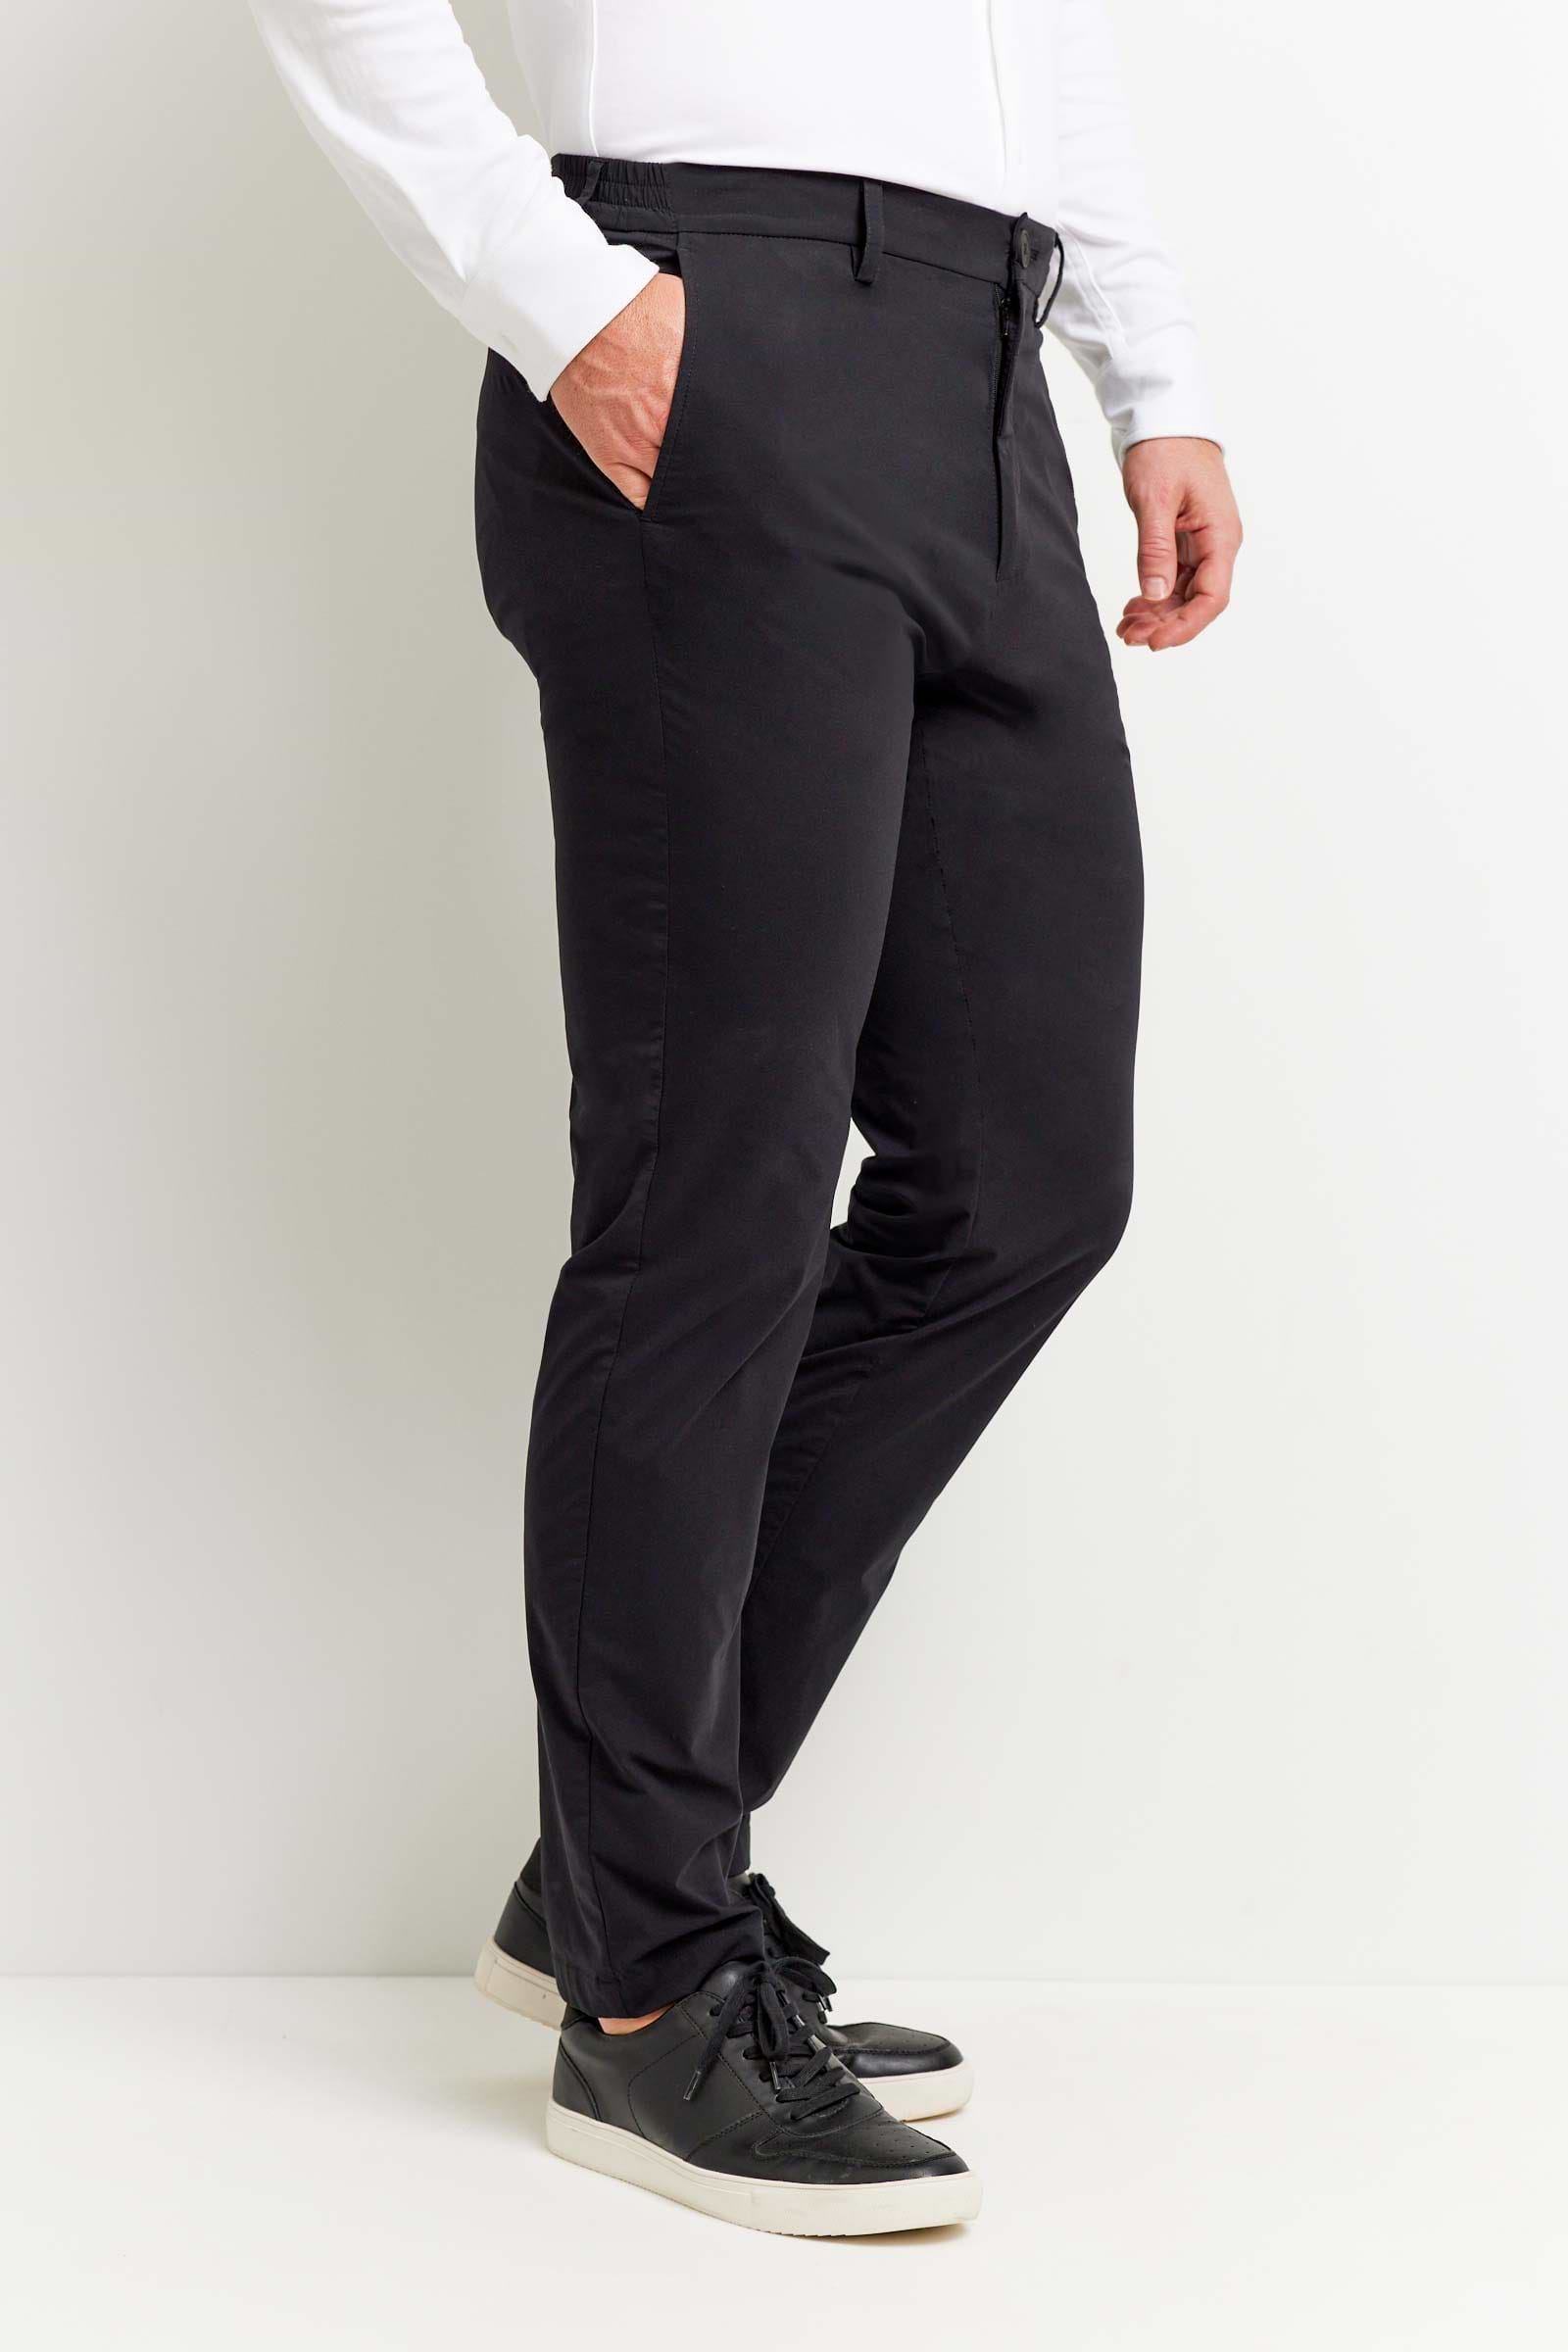 The Best Travel Pant. Man Showing the Side Profile of a Men's Stewart Pant in Black.